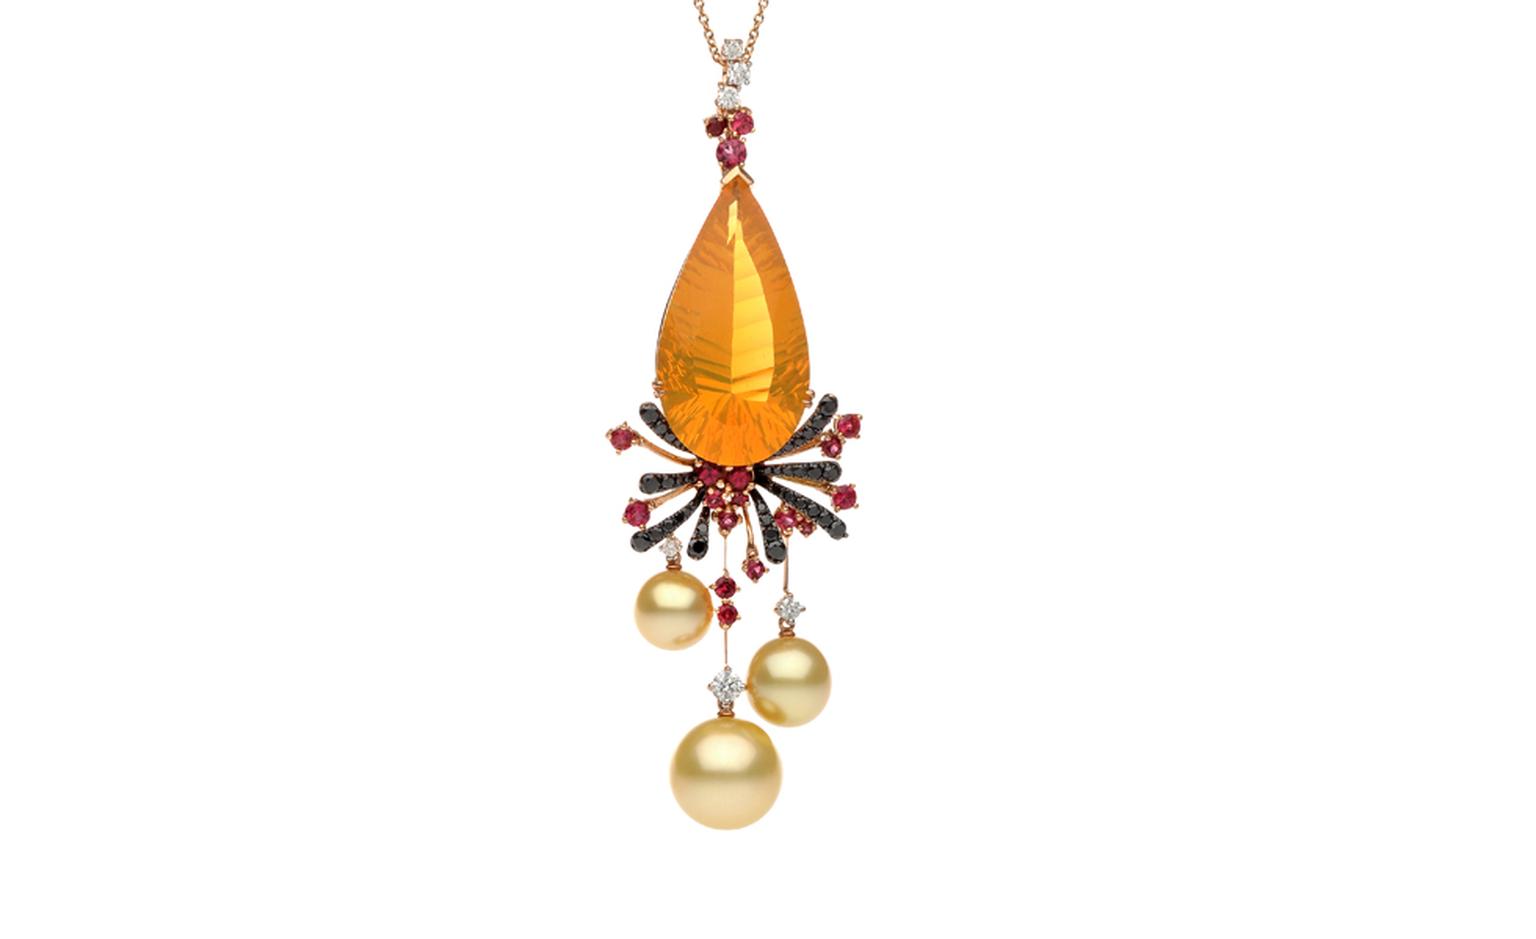 Autore, Fire & Ice Fiery Lava rose gold, South Sea pearl, red spinel, fire opal, and black and white diamond necklace. $65,000 AUD